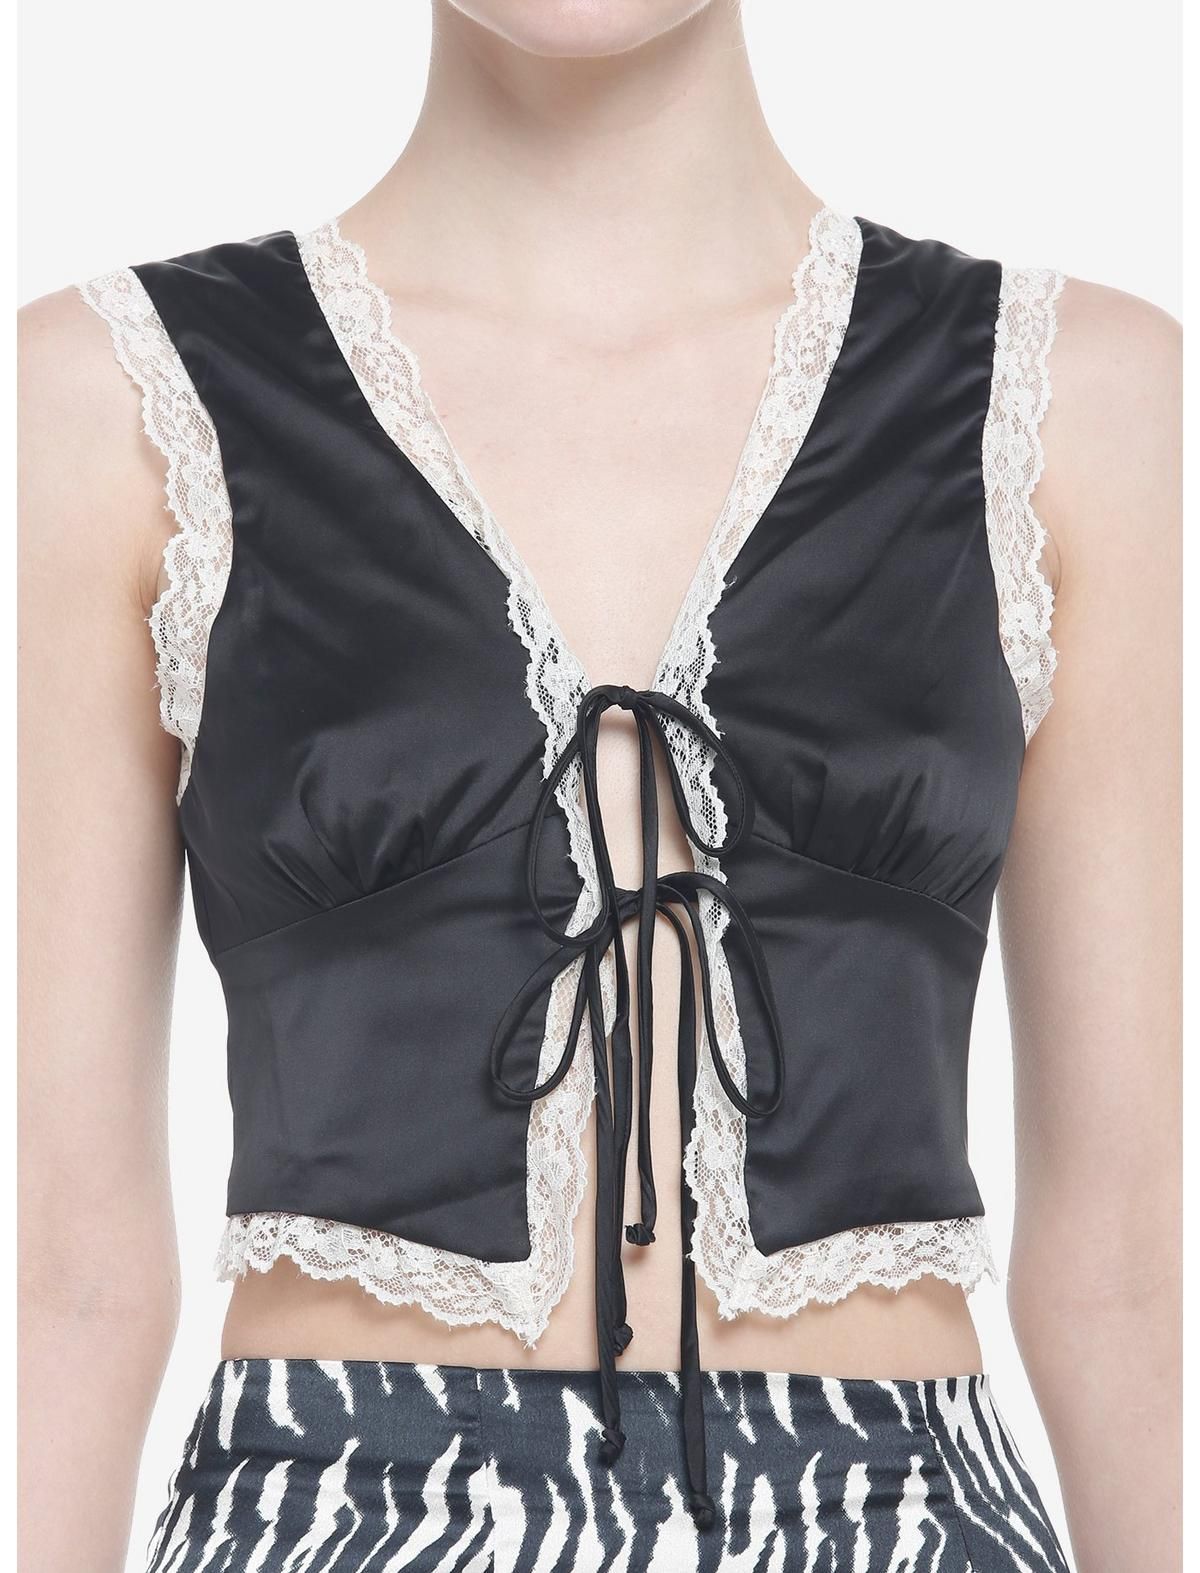 Black Satin Lace Tie-Front Cropped Girls Vest Top | Hot Topic